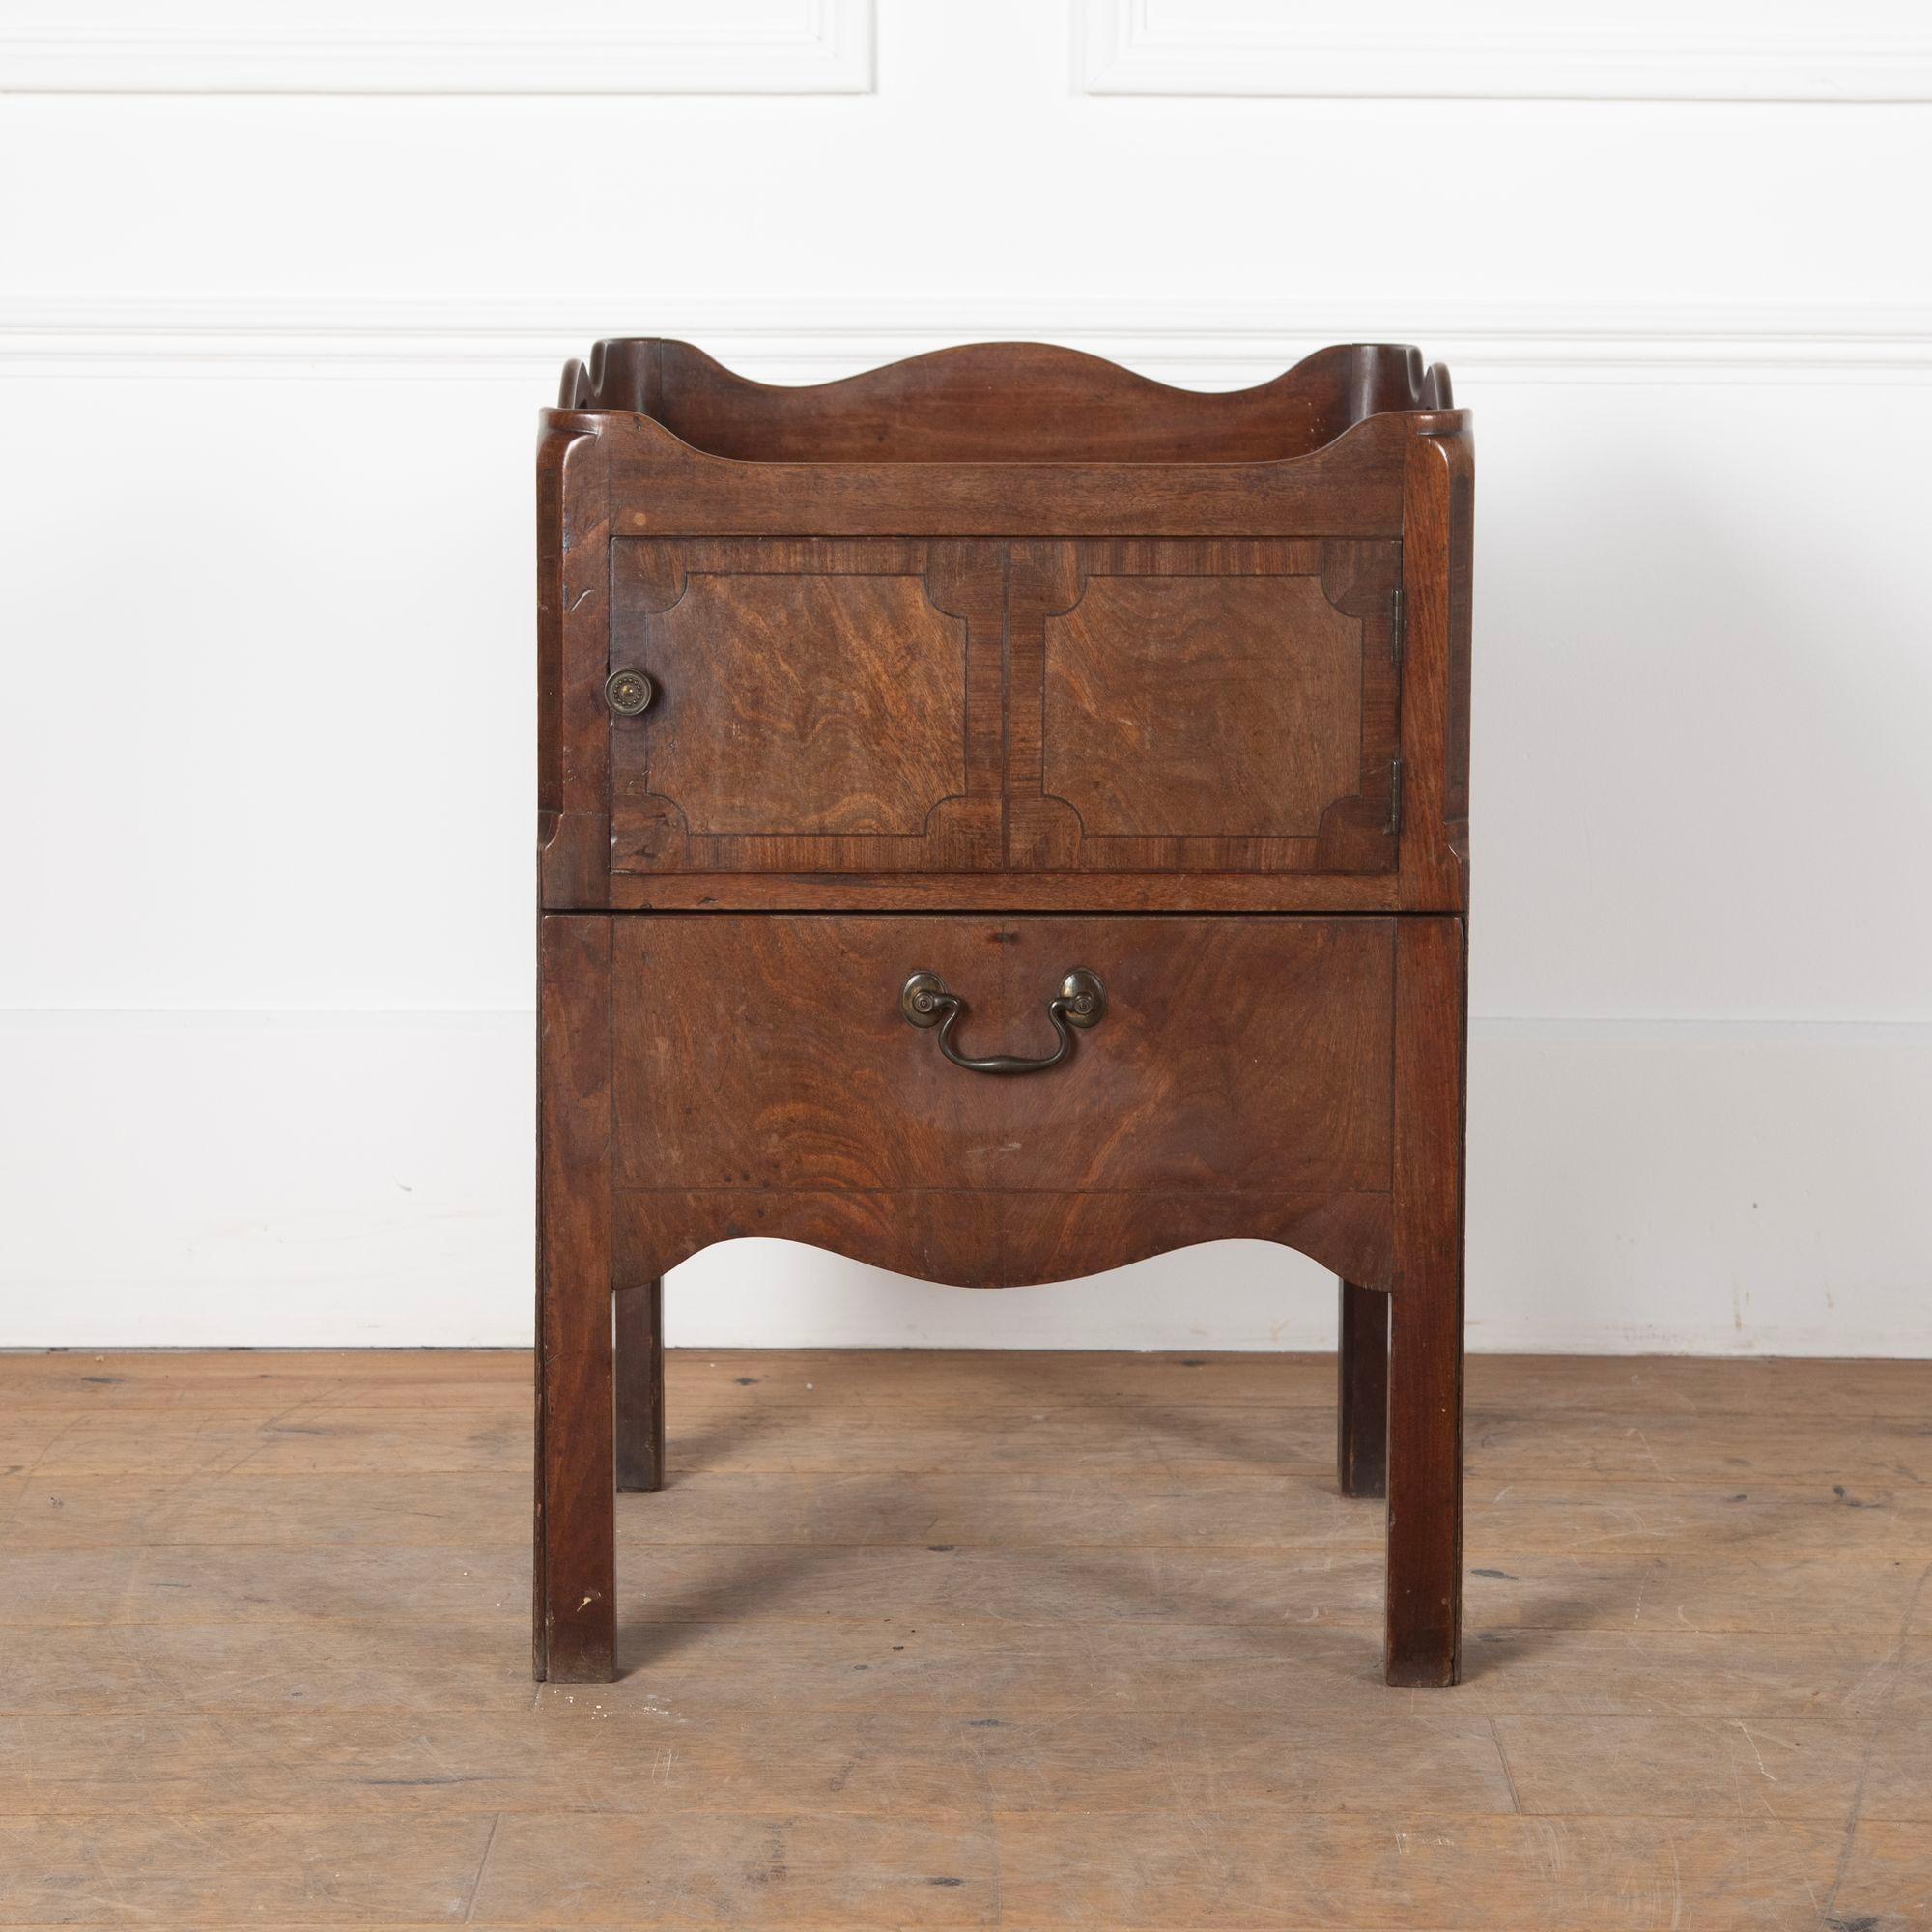 George III mahogany bedside cupboard with pull-out drawer, formerly a commode.
The cupboard compartment has had a new base fitted to it, and the pull-out section which had a commode fitted has now been altered to accommodate a new drawer.
The drawer